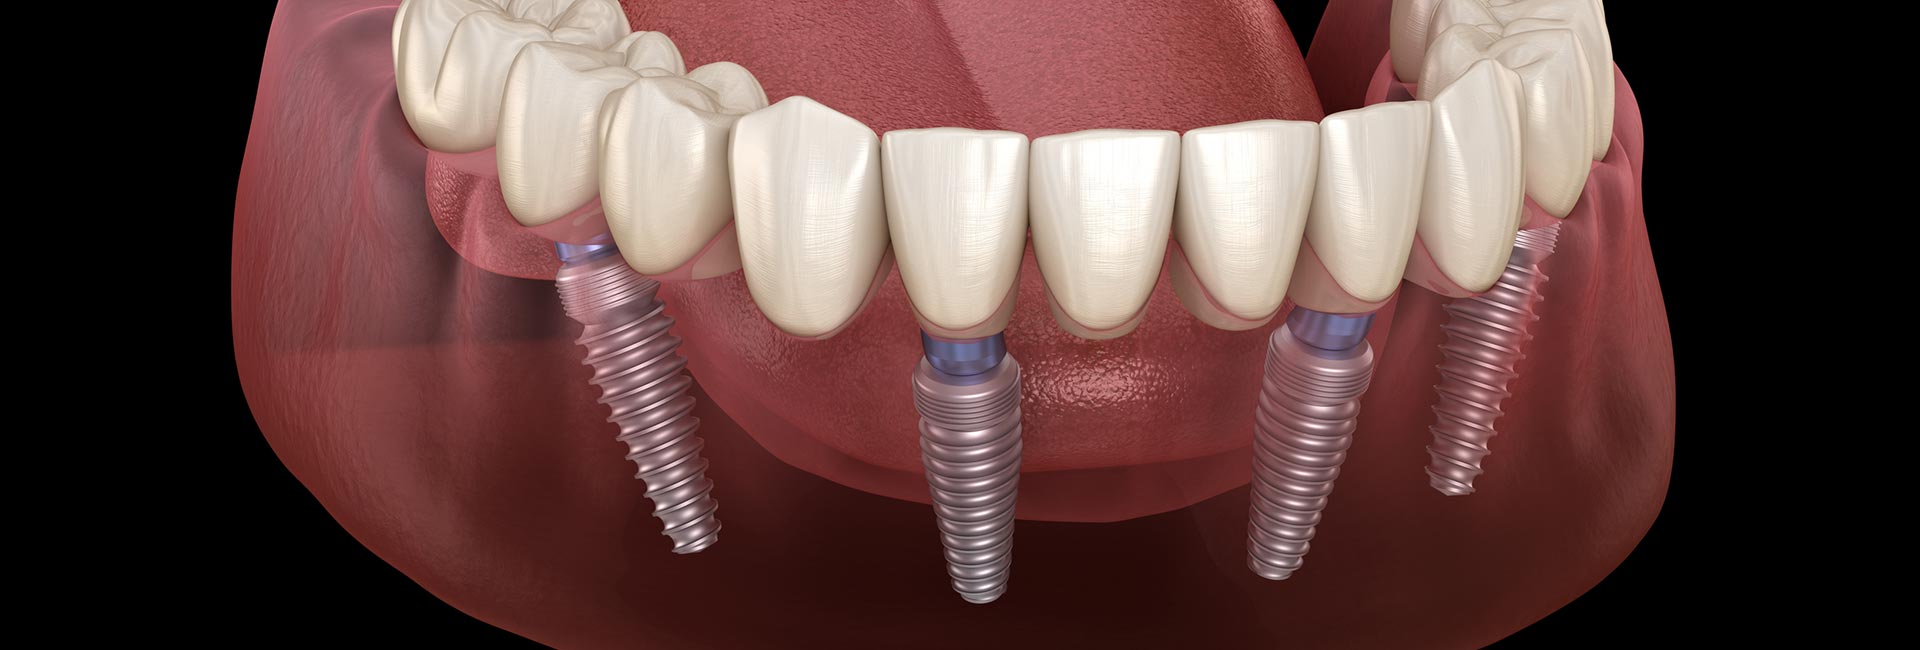 Mandibular prosthesis All on 4 system supported by implants